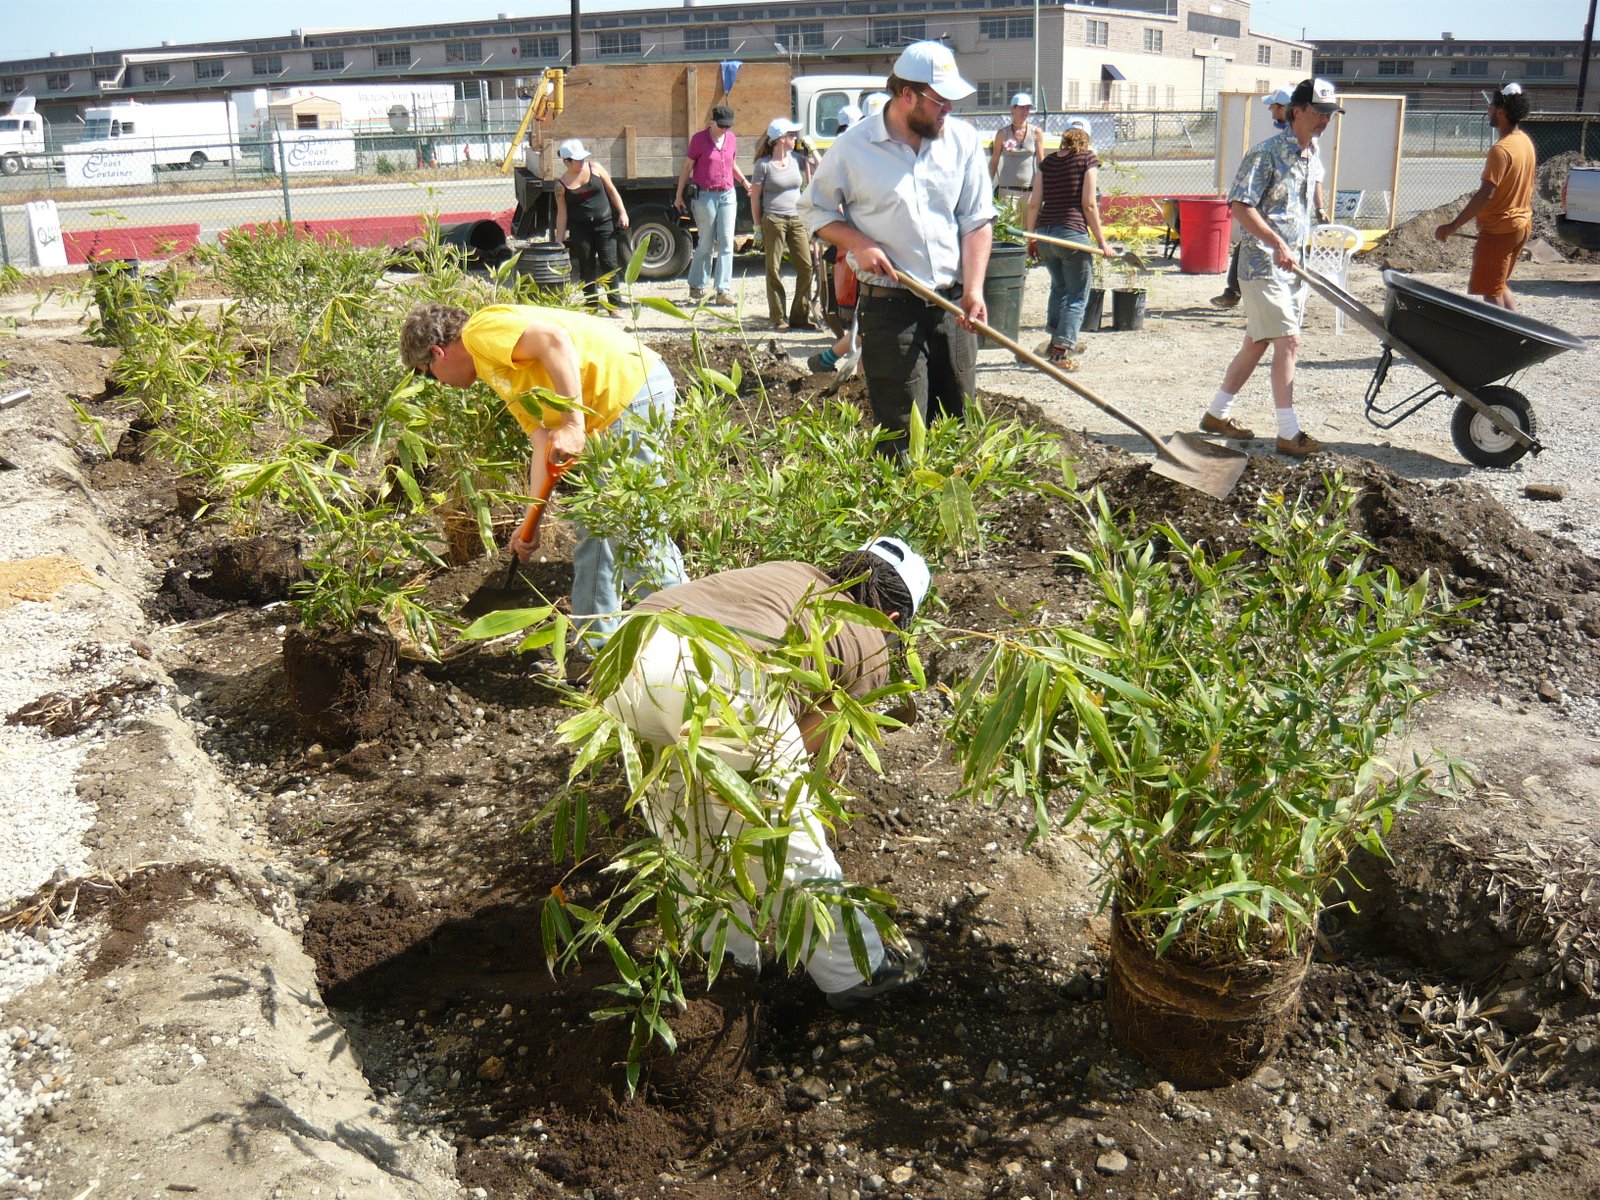 Volunteers planting bamboo at the Port of Oakland.